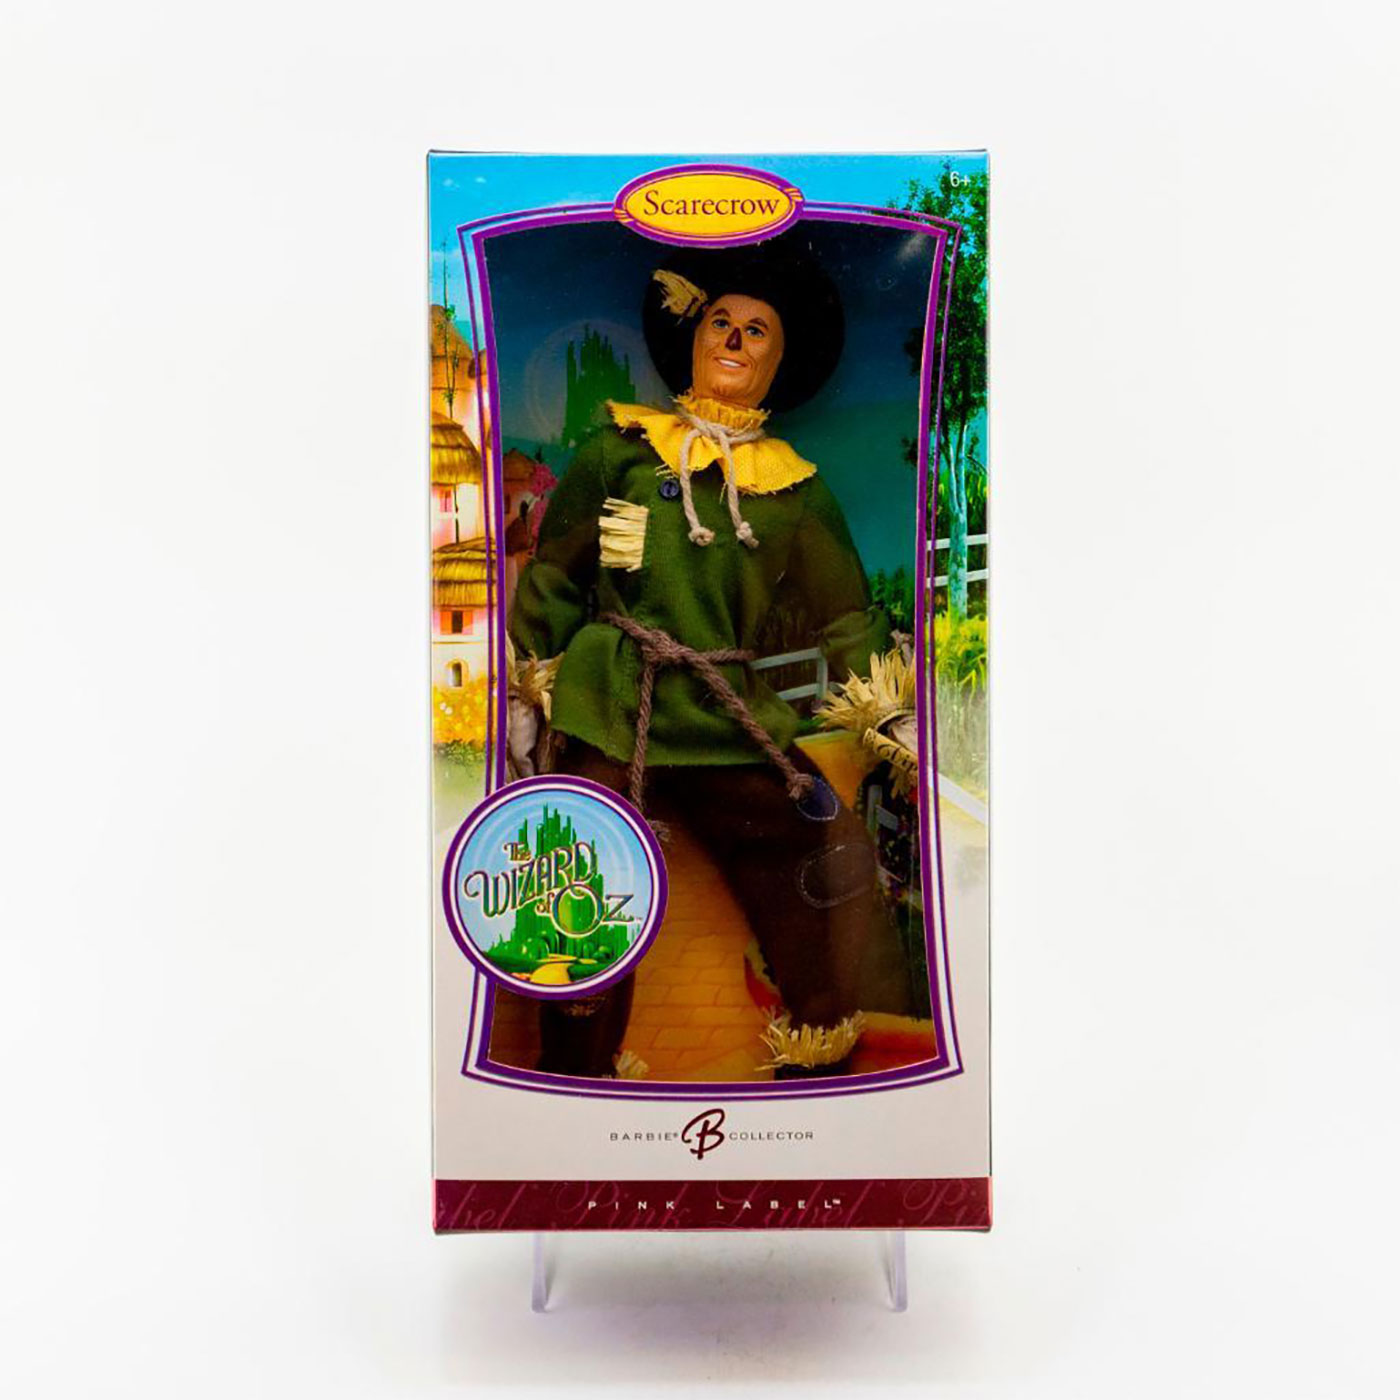 Ken as The Scarecrow in The Wizard of Oz (Collector Edition